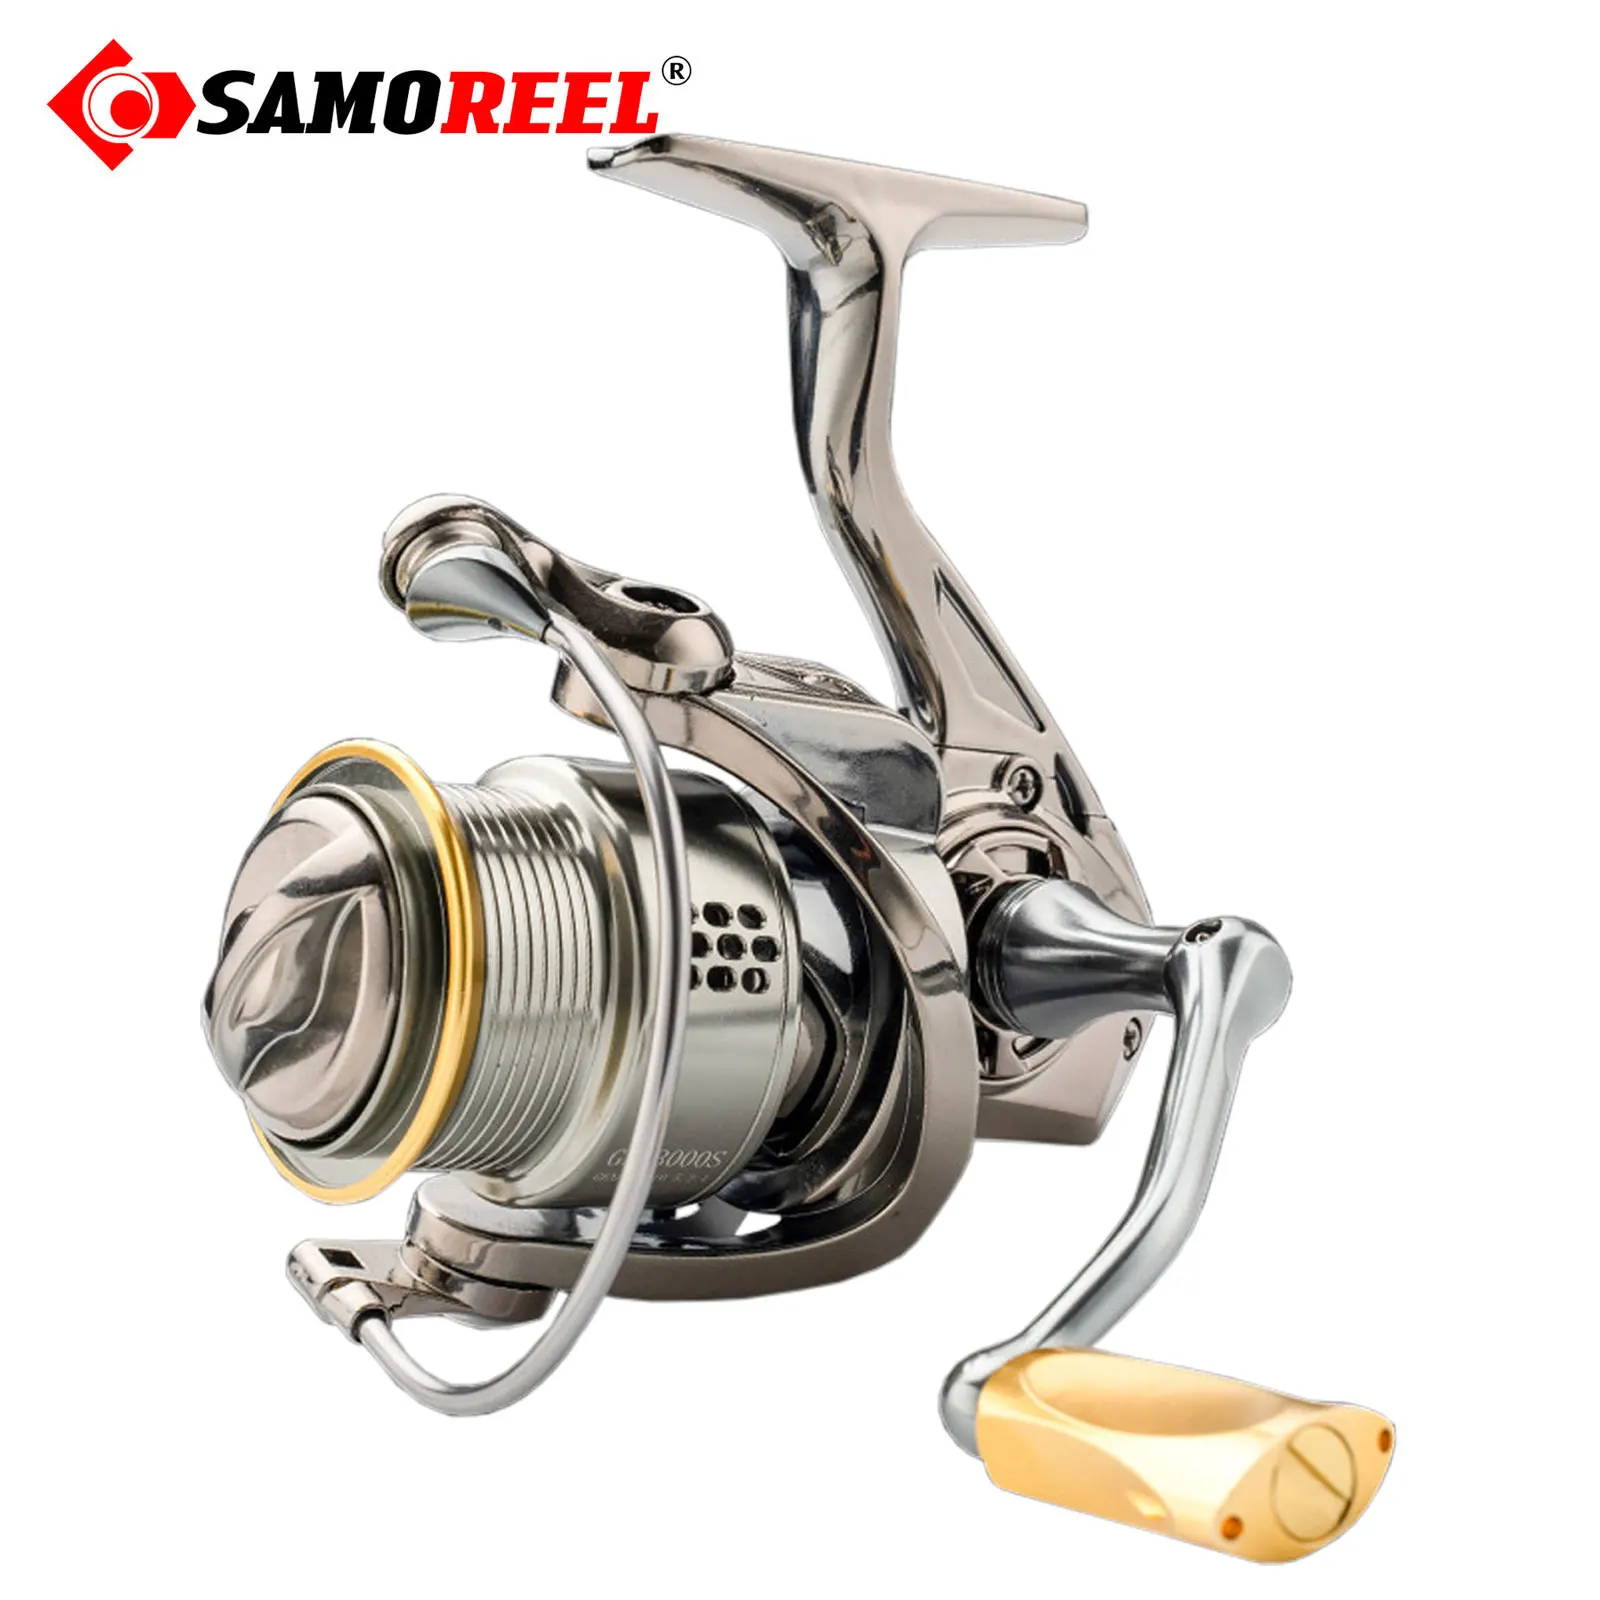 

2023 Full Electroplating Spinning Fishing Reel Coil 6+1BB 5.2:1 8kg Drag Shallow Spool Saltwater Waterproof Tackle For Bass Pike